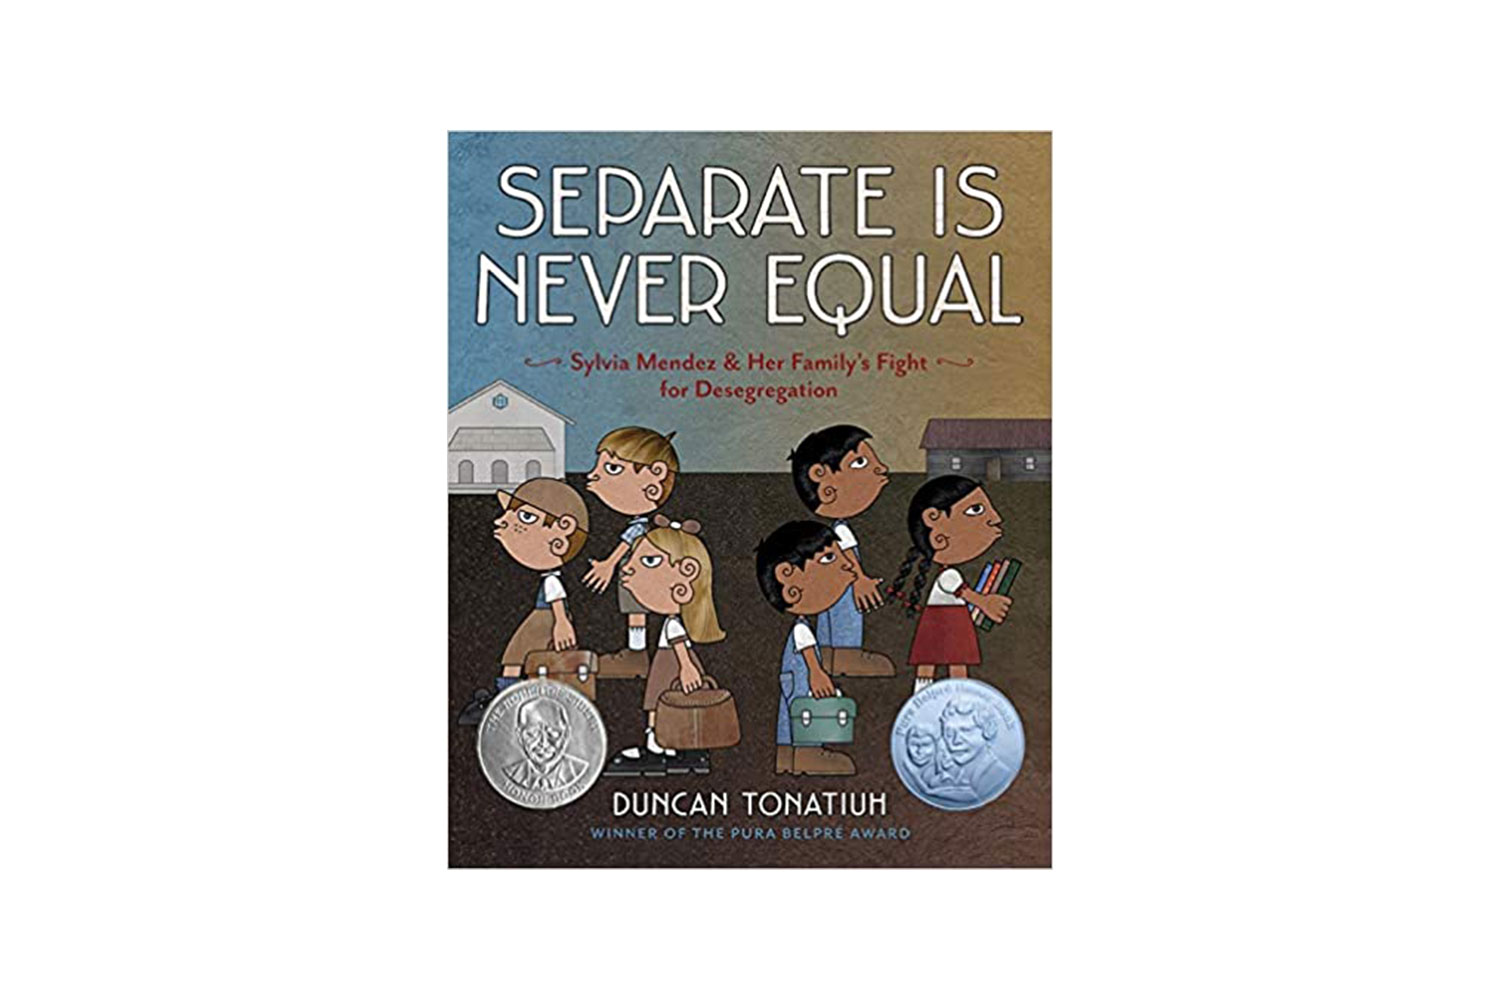 'Separate Is Never Equal: Sylvia Mendez and Her Family's Fight for Desegregation' by Duncan Tonatiuh